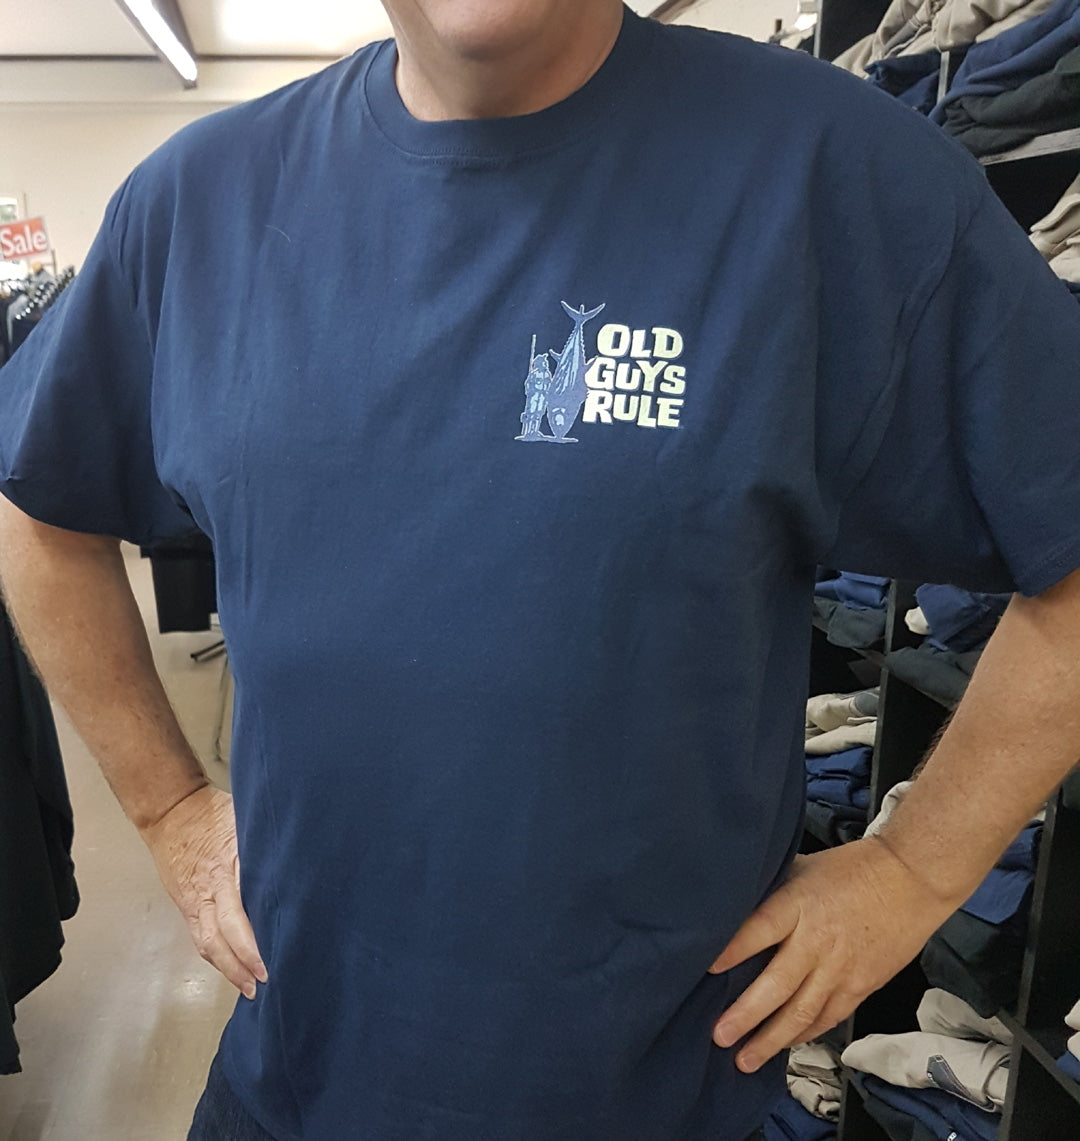 Size Matters T-Shirt by Old Guys Rule Navy Mens Tshirt by Old Guys Rule OGR | The Bloke Shop